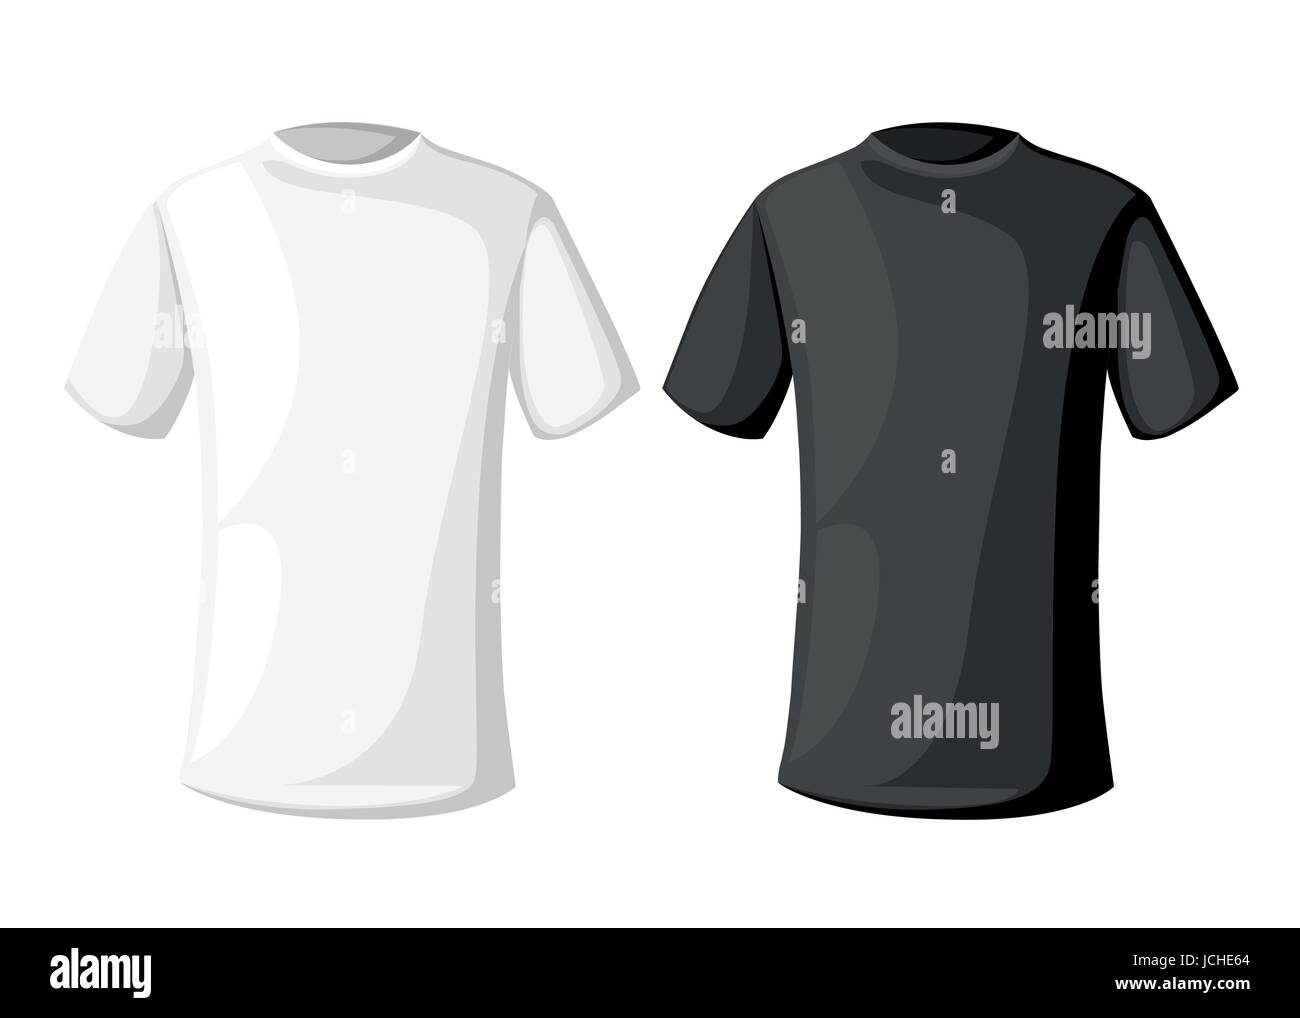 Vector illustration. Men's short round neck t-shirt . Front, side and back views. Black and white variants. Stock Vector